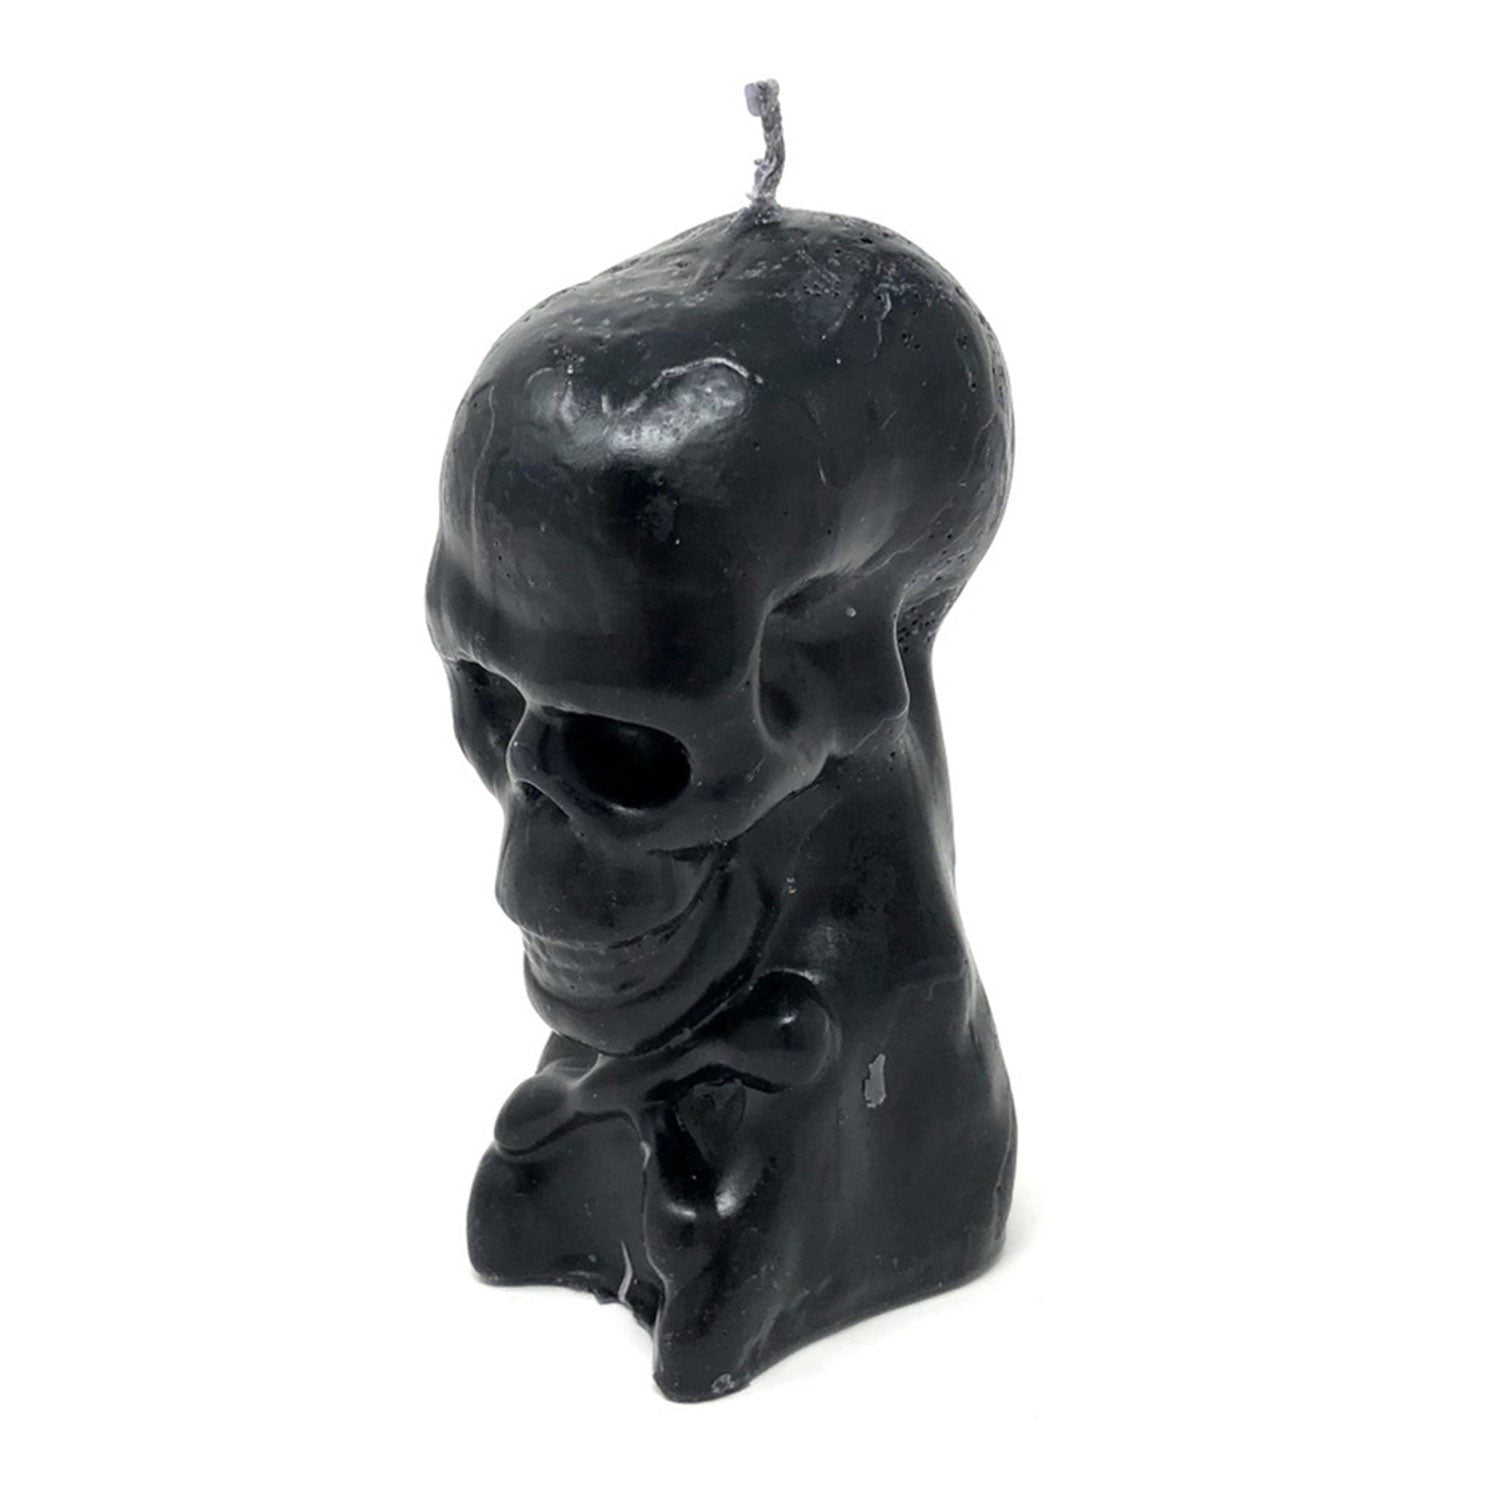 Black Skull Candle 5 inch - 13 Moons